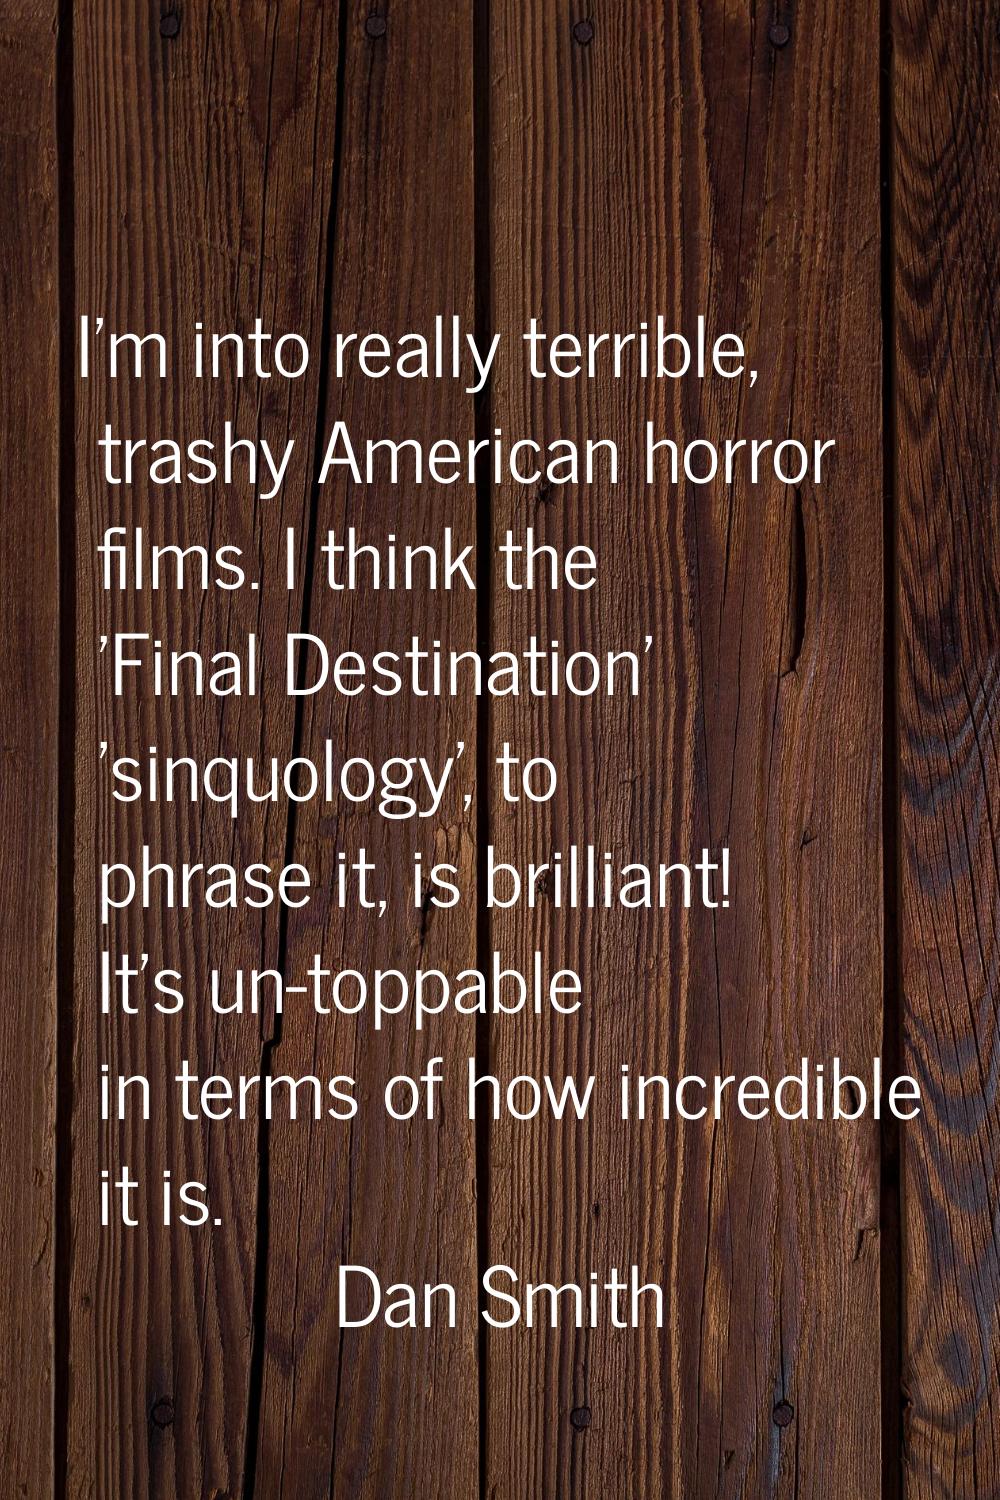 I'm into really terrible, trashy American horror films. I think the 'Final Destination' 'sinquology